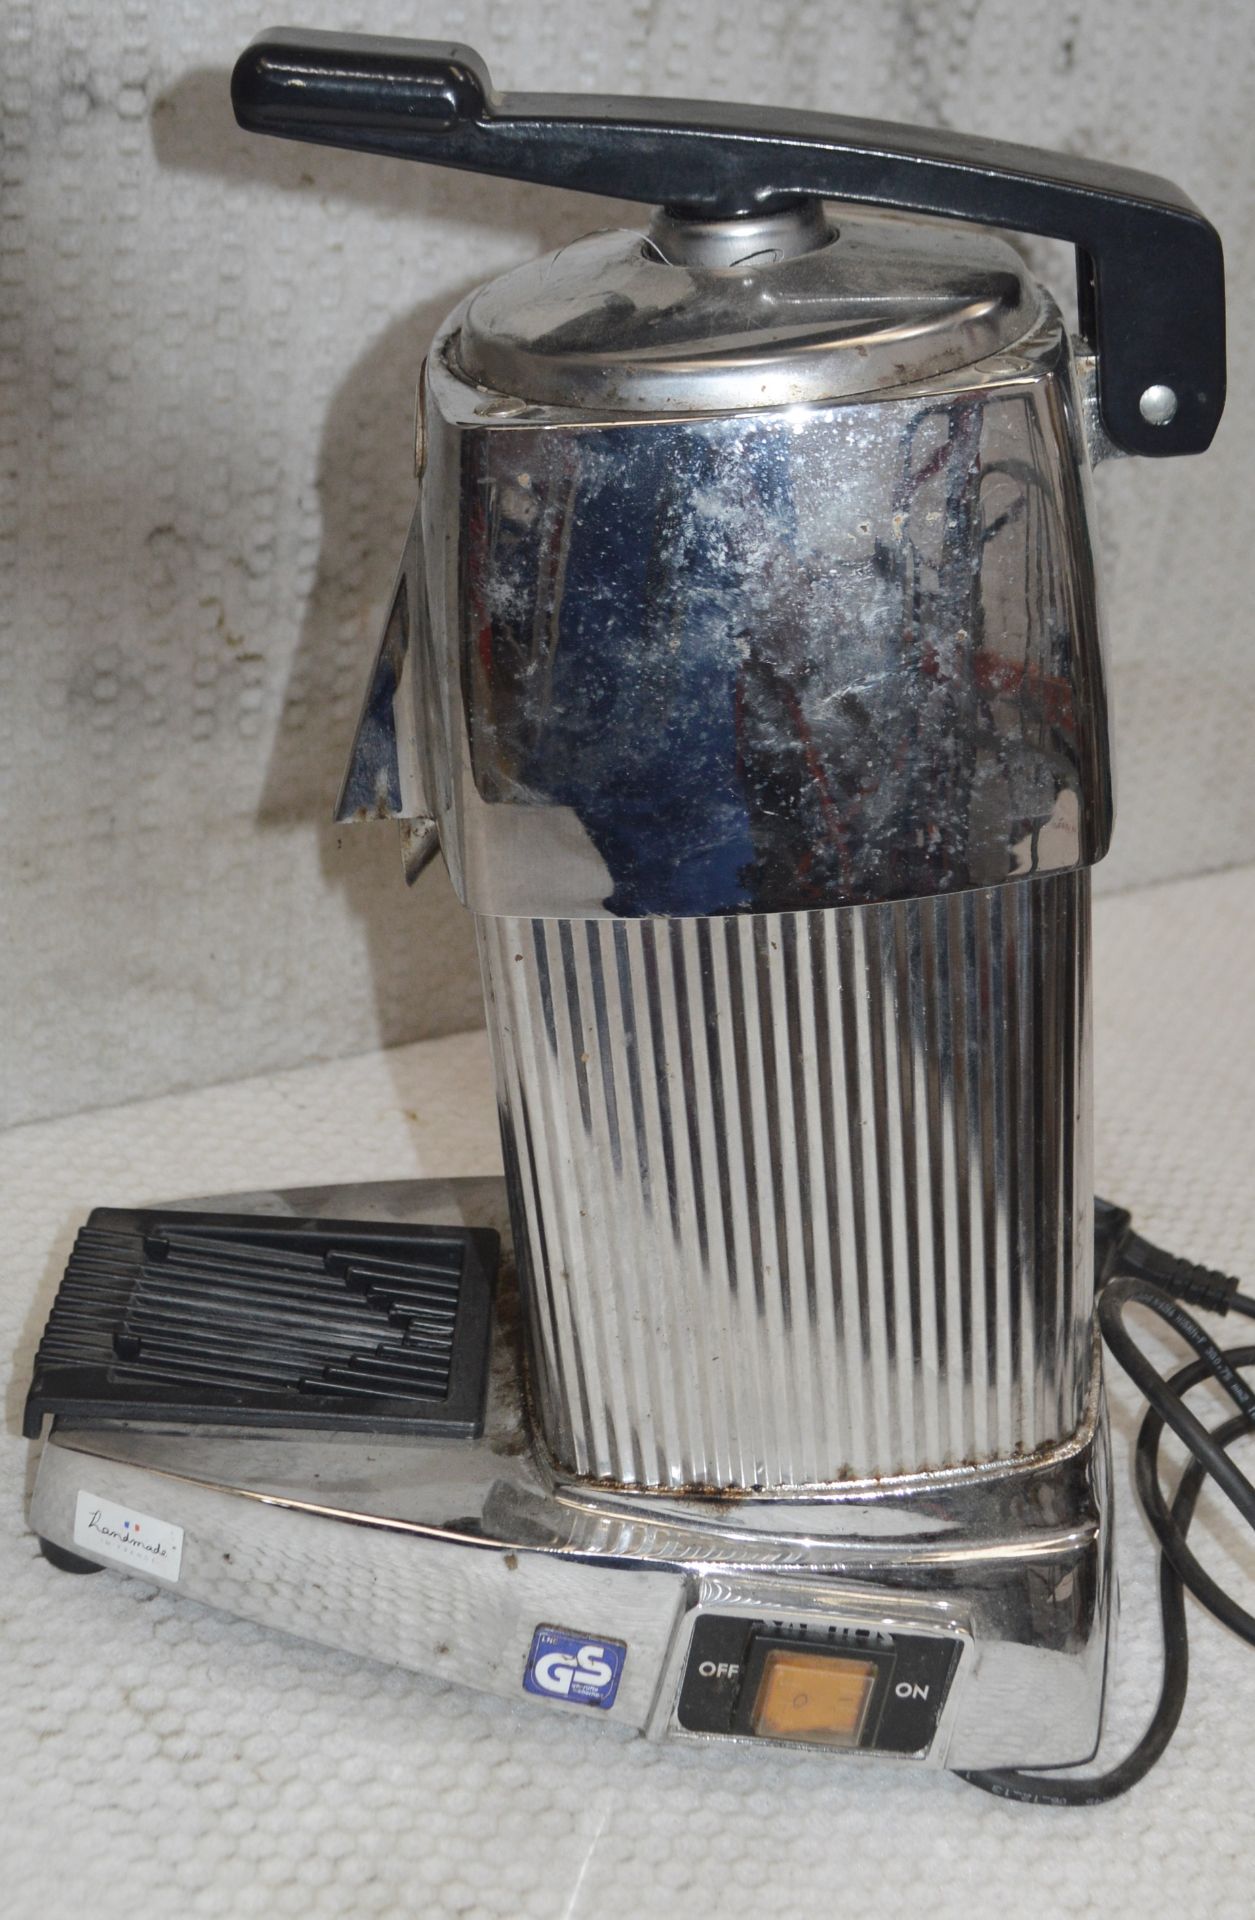 1 x Santos French Handmade Juicer - (220-240volts) - Recently Removed From A Commercial Restaurant - Image 11 of 13